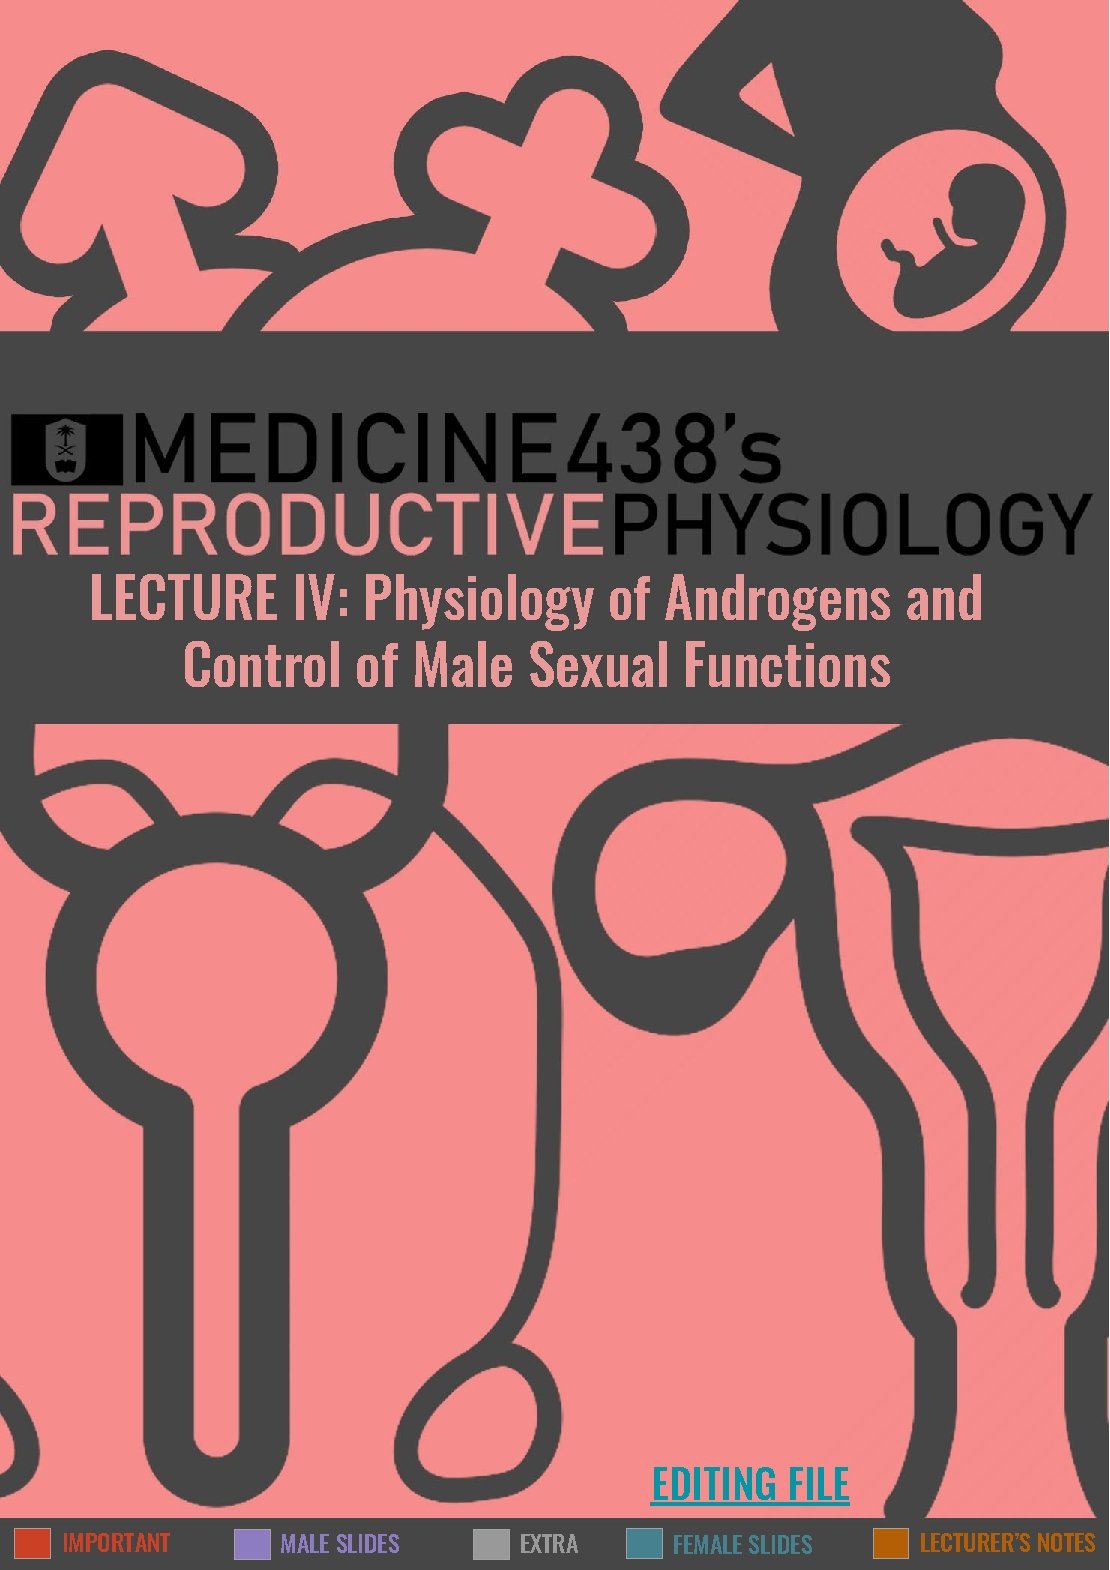 LECTURE IV: Physiology of Androgens and Control of Male Sexual Functions EDITING FILE IMPORTANT